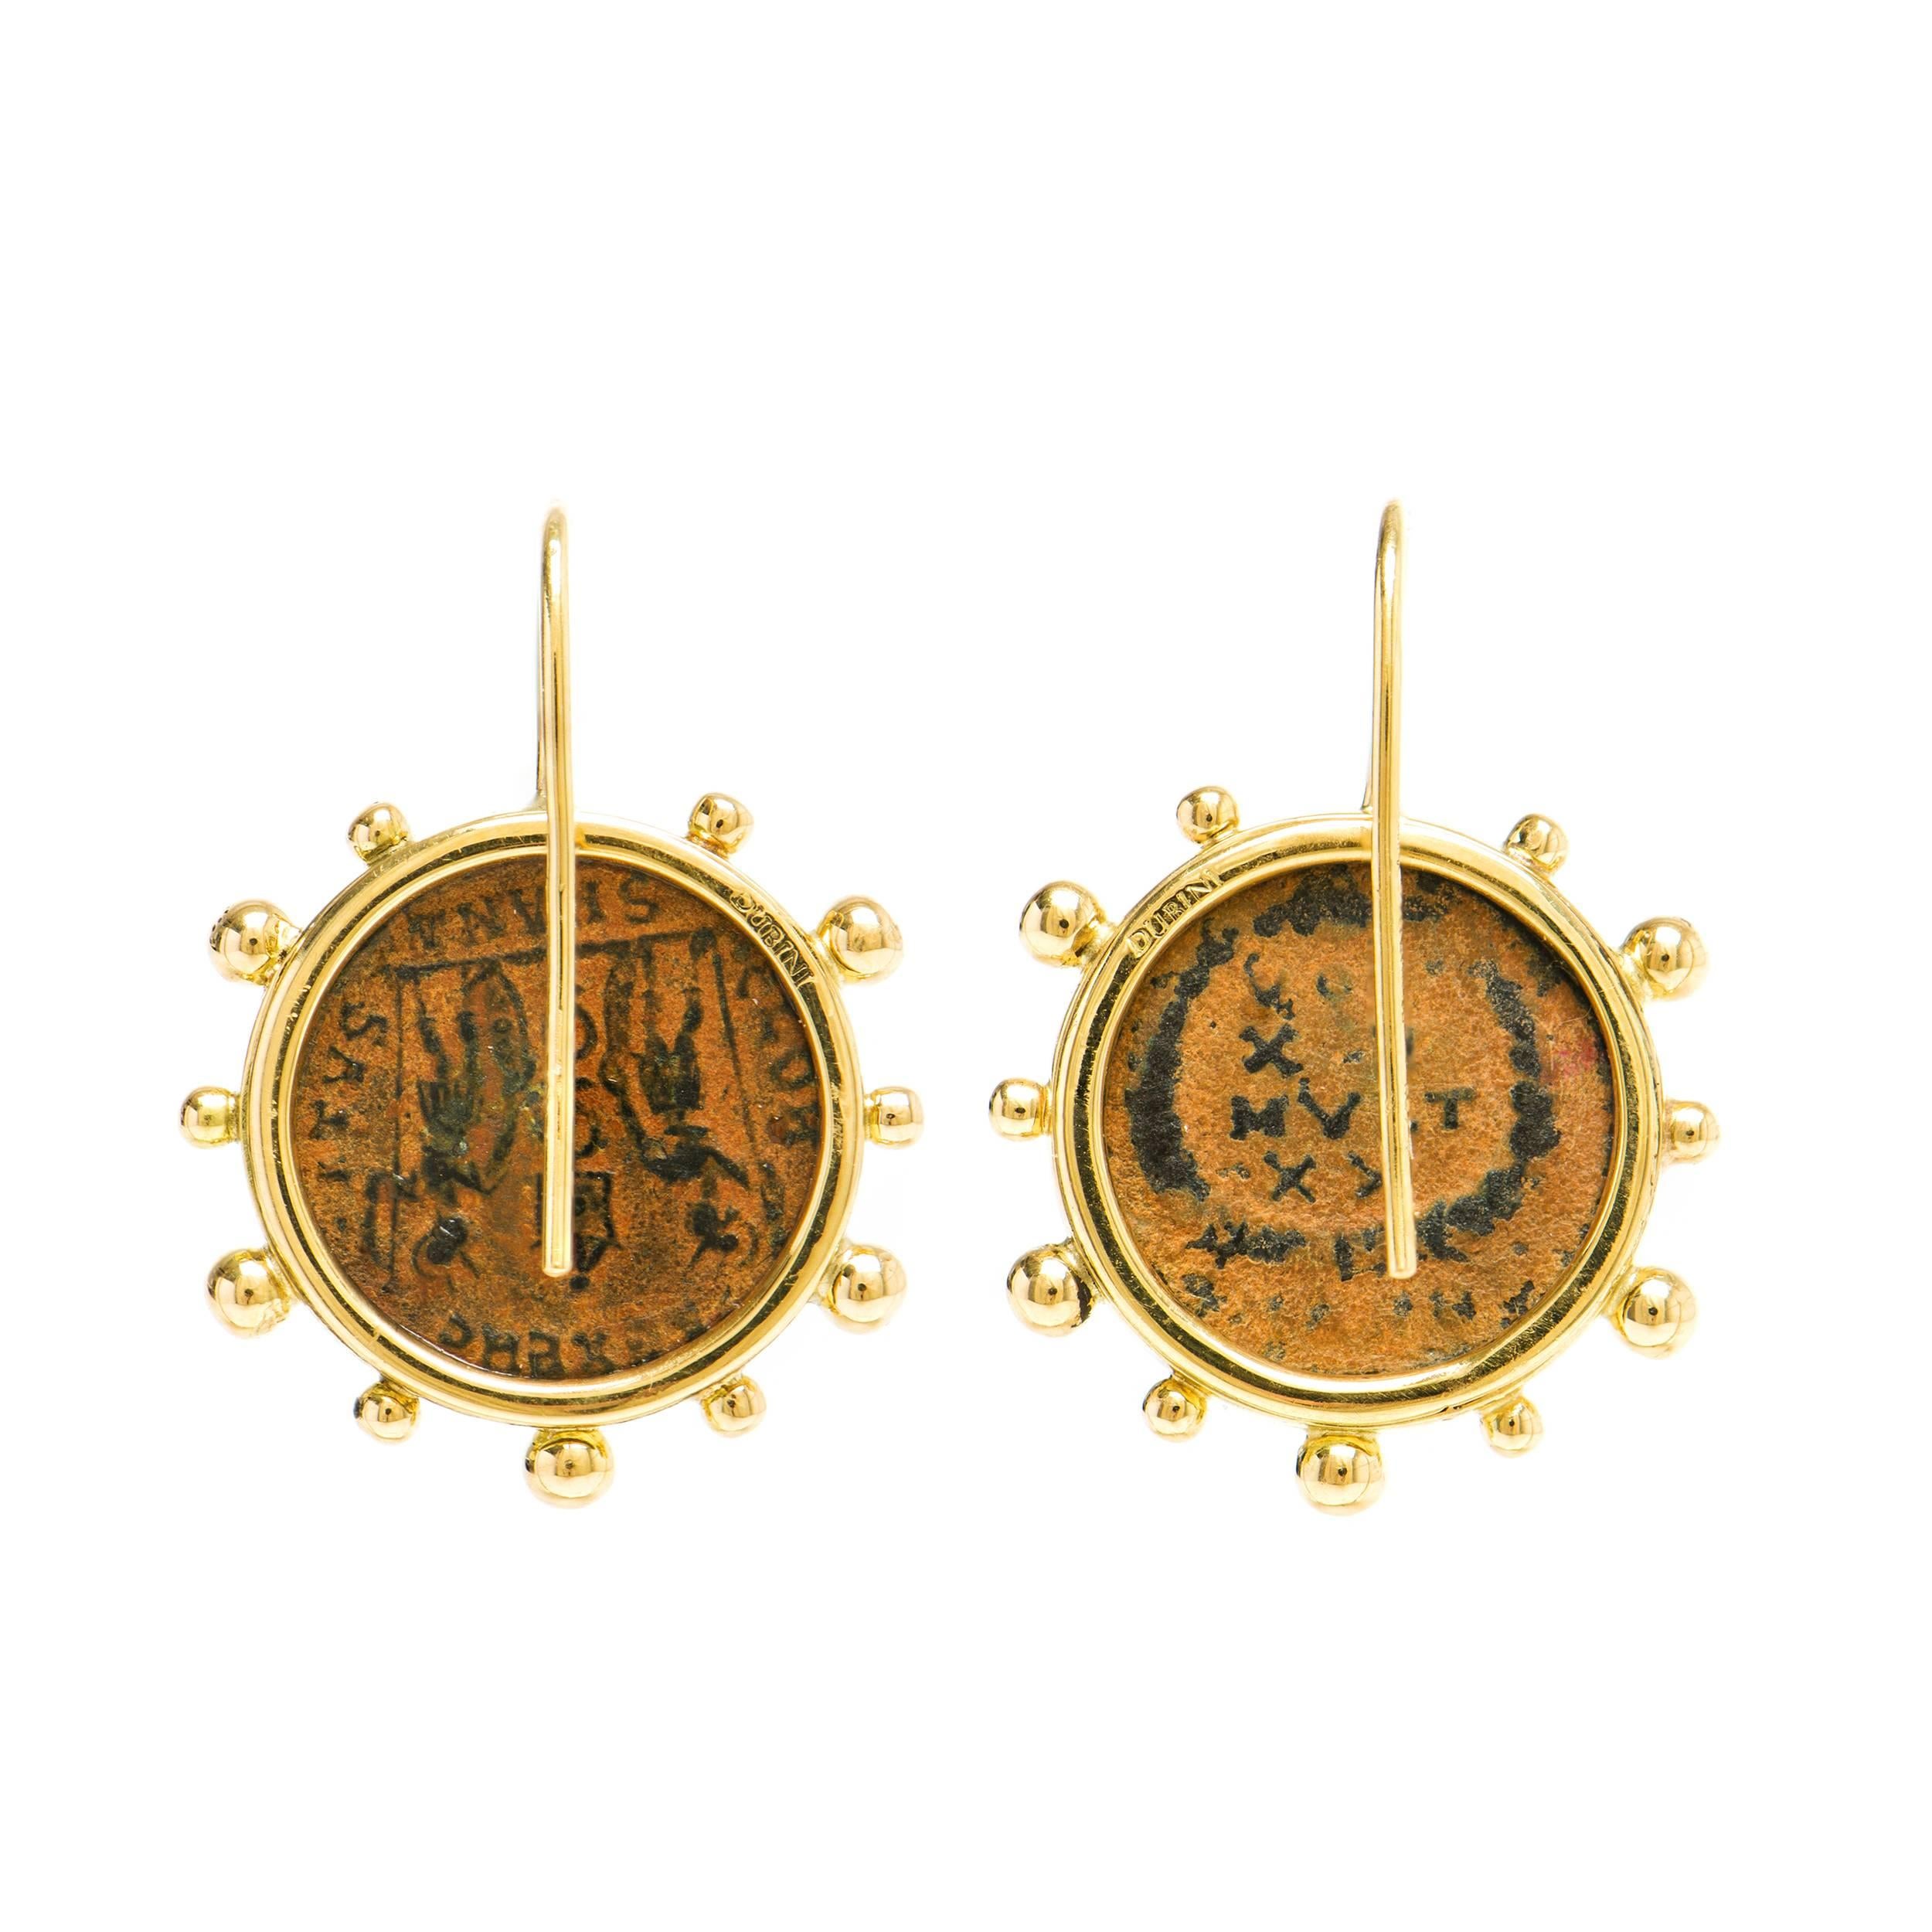 These Dubini coin earrings from the 'Empires' collection feature authentic Roman Imperial bronze coins set in 18K yellow gold.

Made to order with a lead time of 2-3 weeks.

* Due to the unique process of hand carving coins in ancient times, there